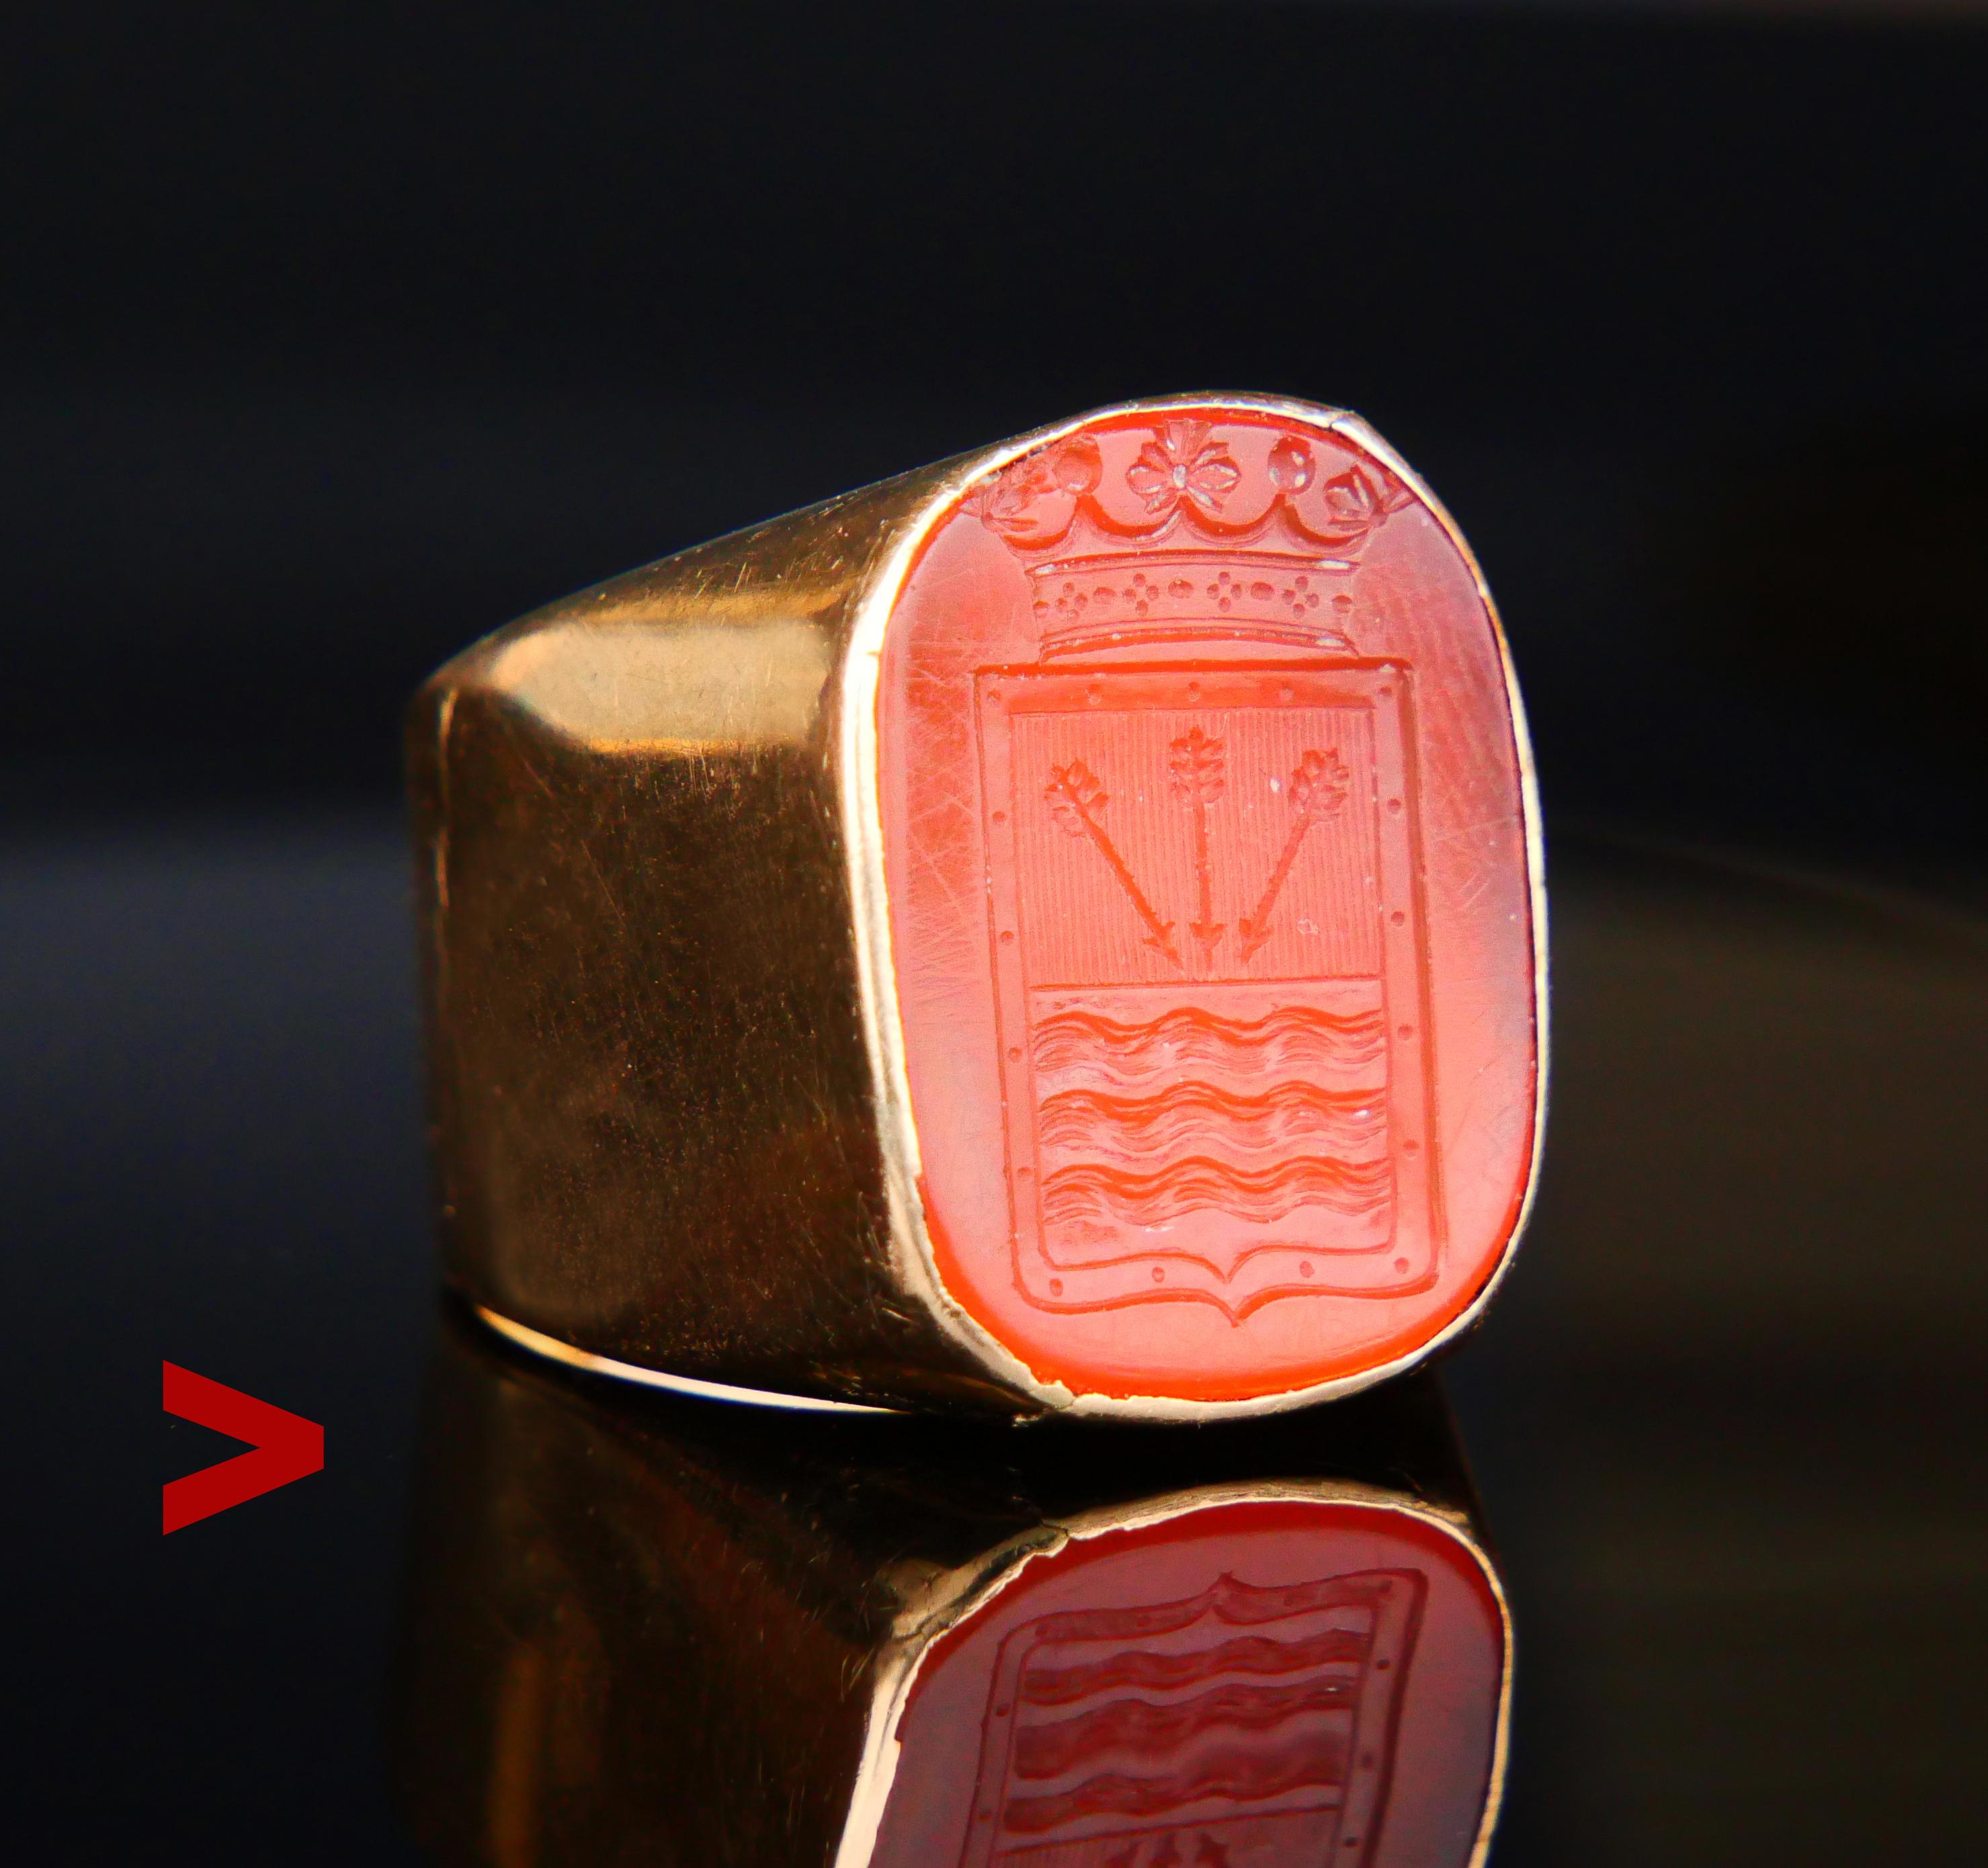 Signet Intaglio Ring featuring Carnelian (type of Agate) stone with the detailed heraldic depiction of Von Boltenstern's coat of arms under the crown of Nobility set into wide band ring in solid 18K Orange Gold.. The body of the stone is dark Orange